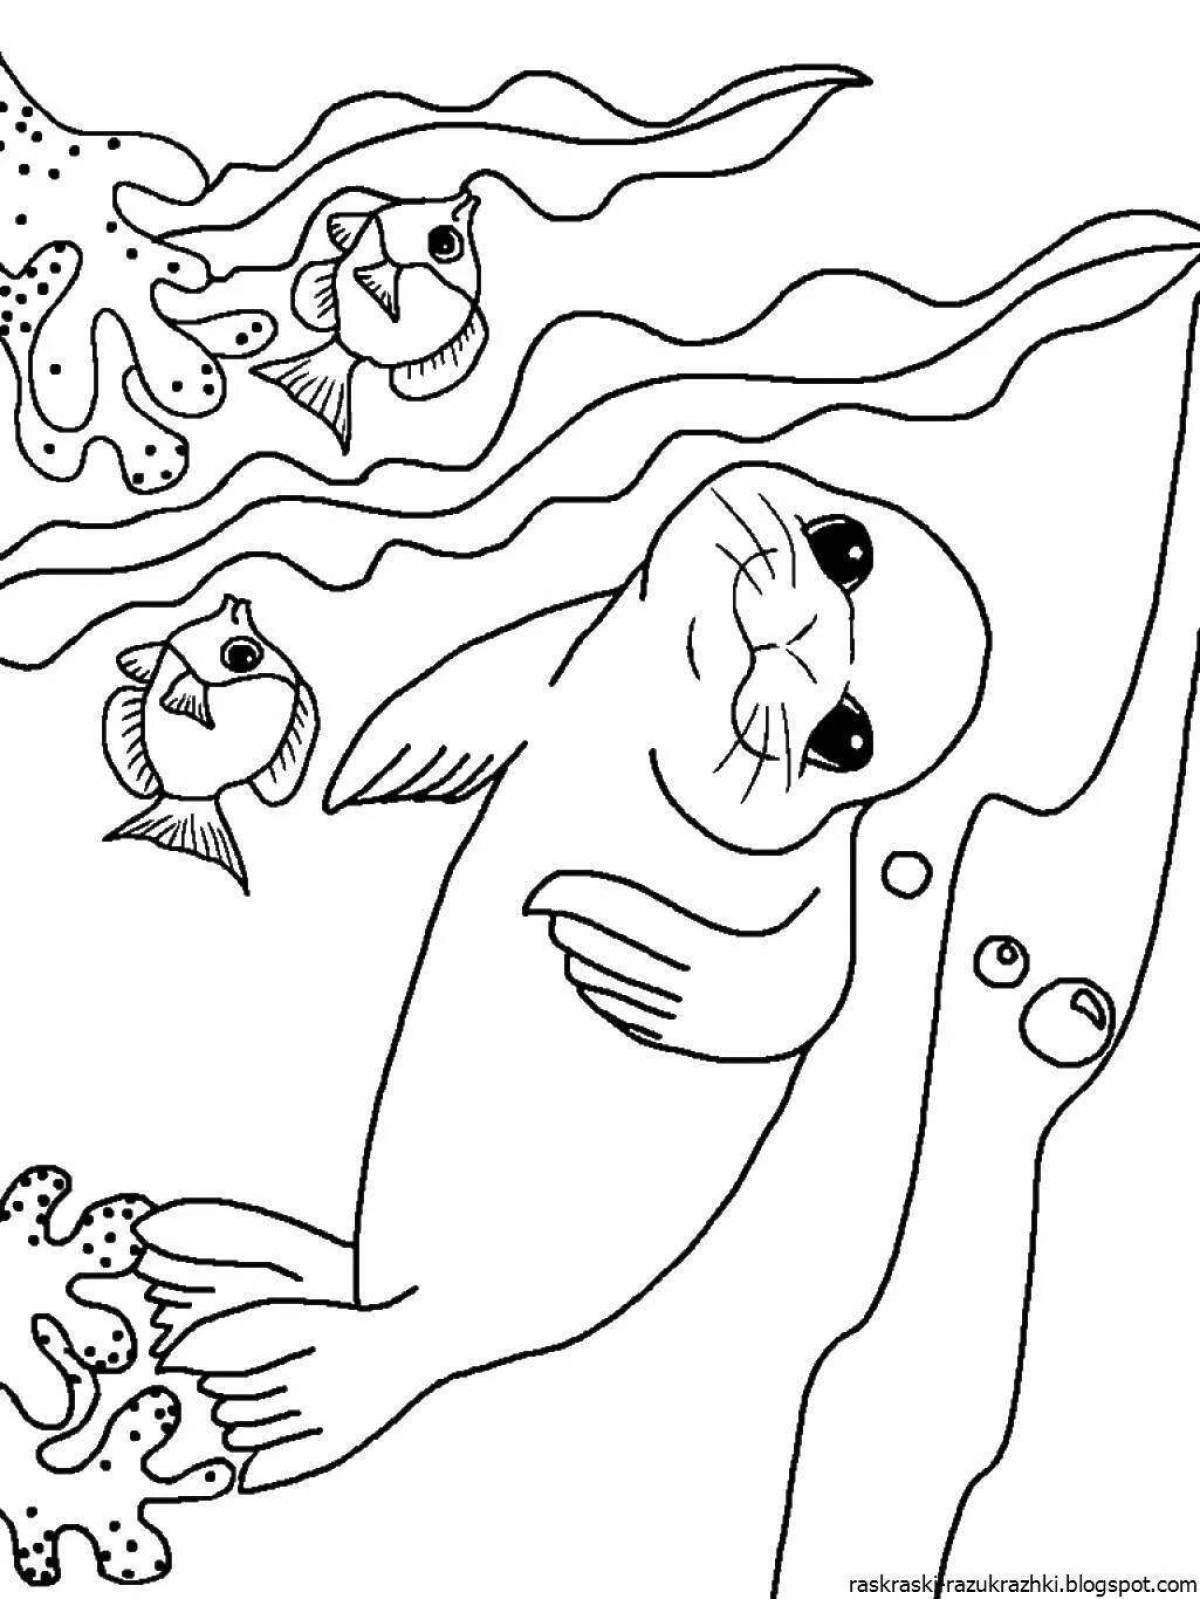 Dynamic marine animal coloring page for kids